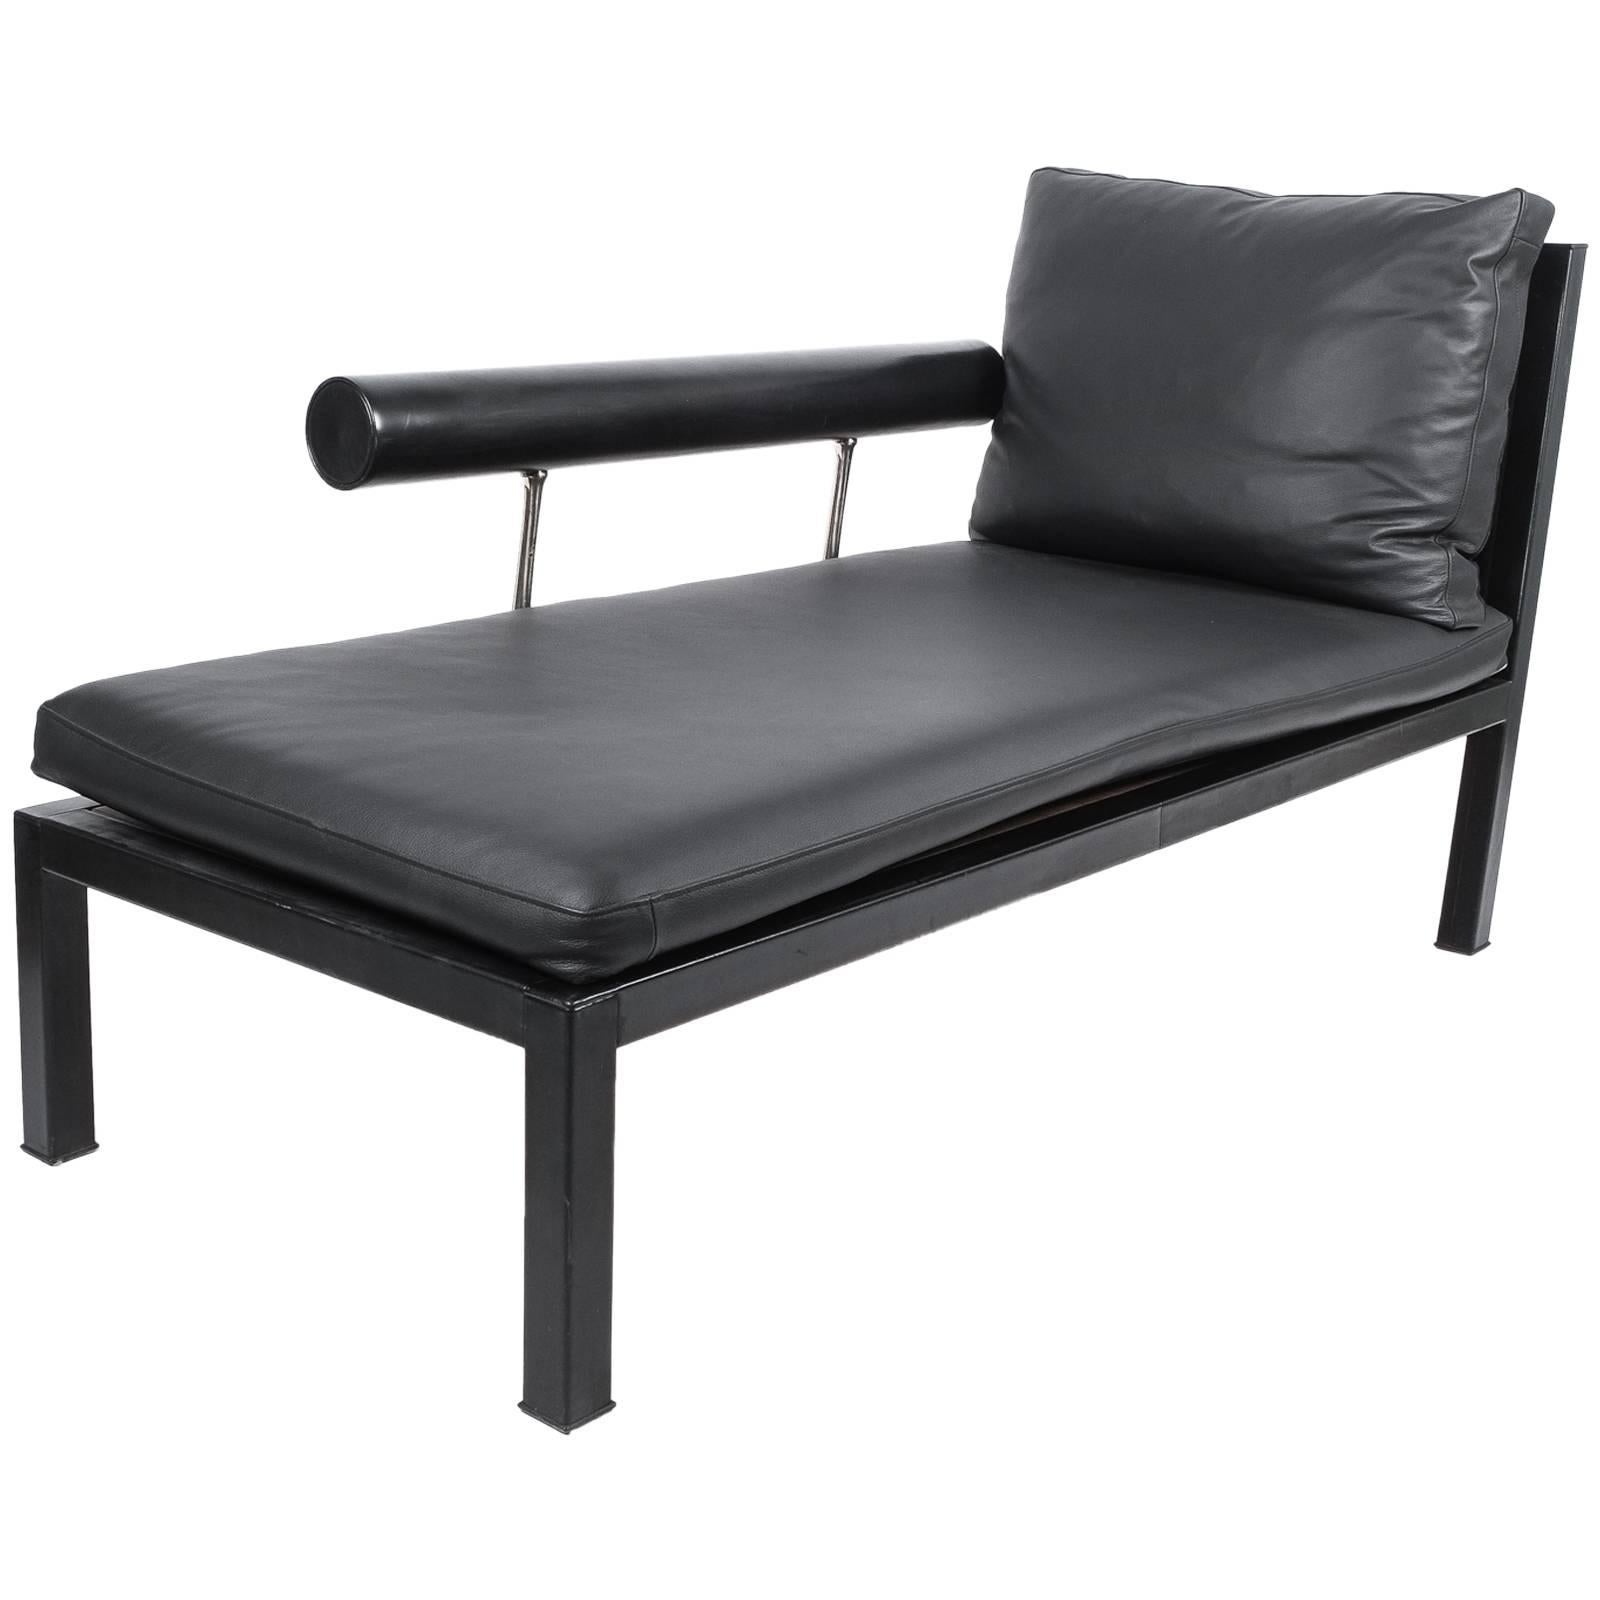 Leather Chaise Lounge Black Sofa Baisity by Antonio Citterio for B&B Italy, 1980 For Sale 4